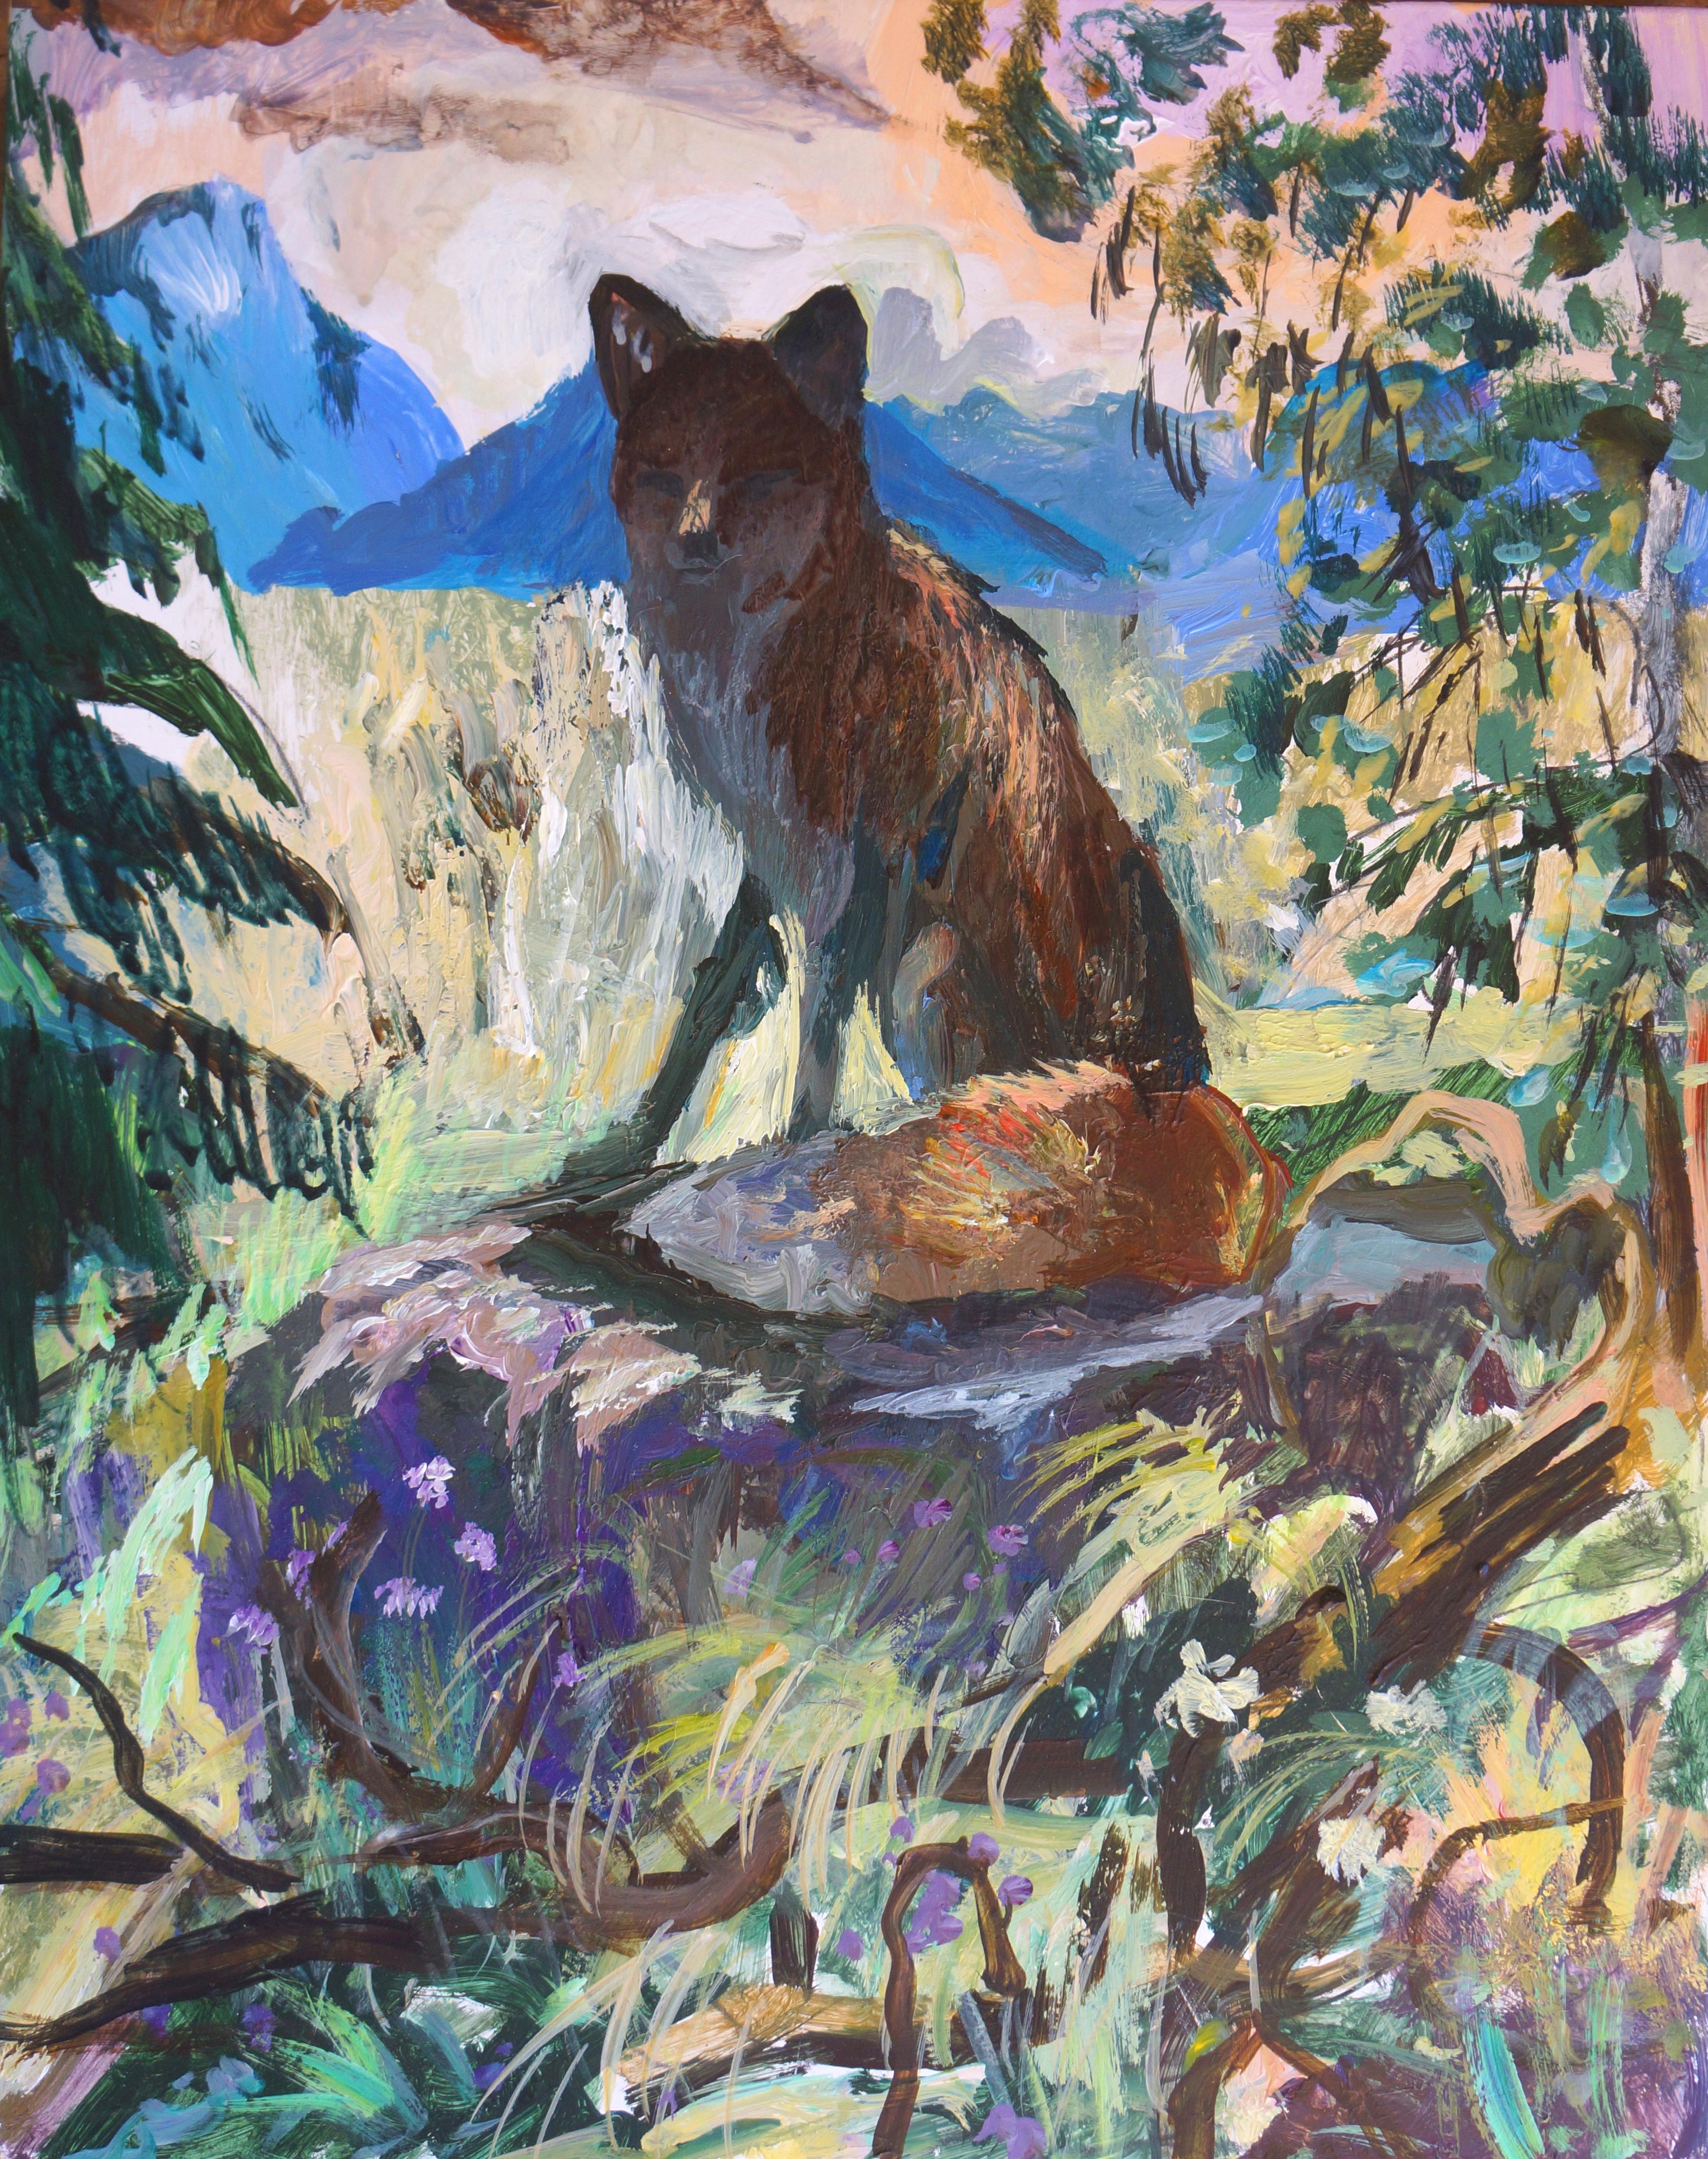 John Defeo Landscape Painting - Fox in Dappled on a Good Hearted Friend